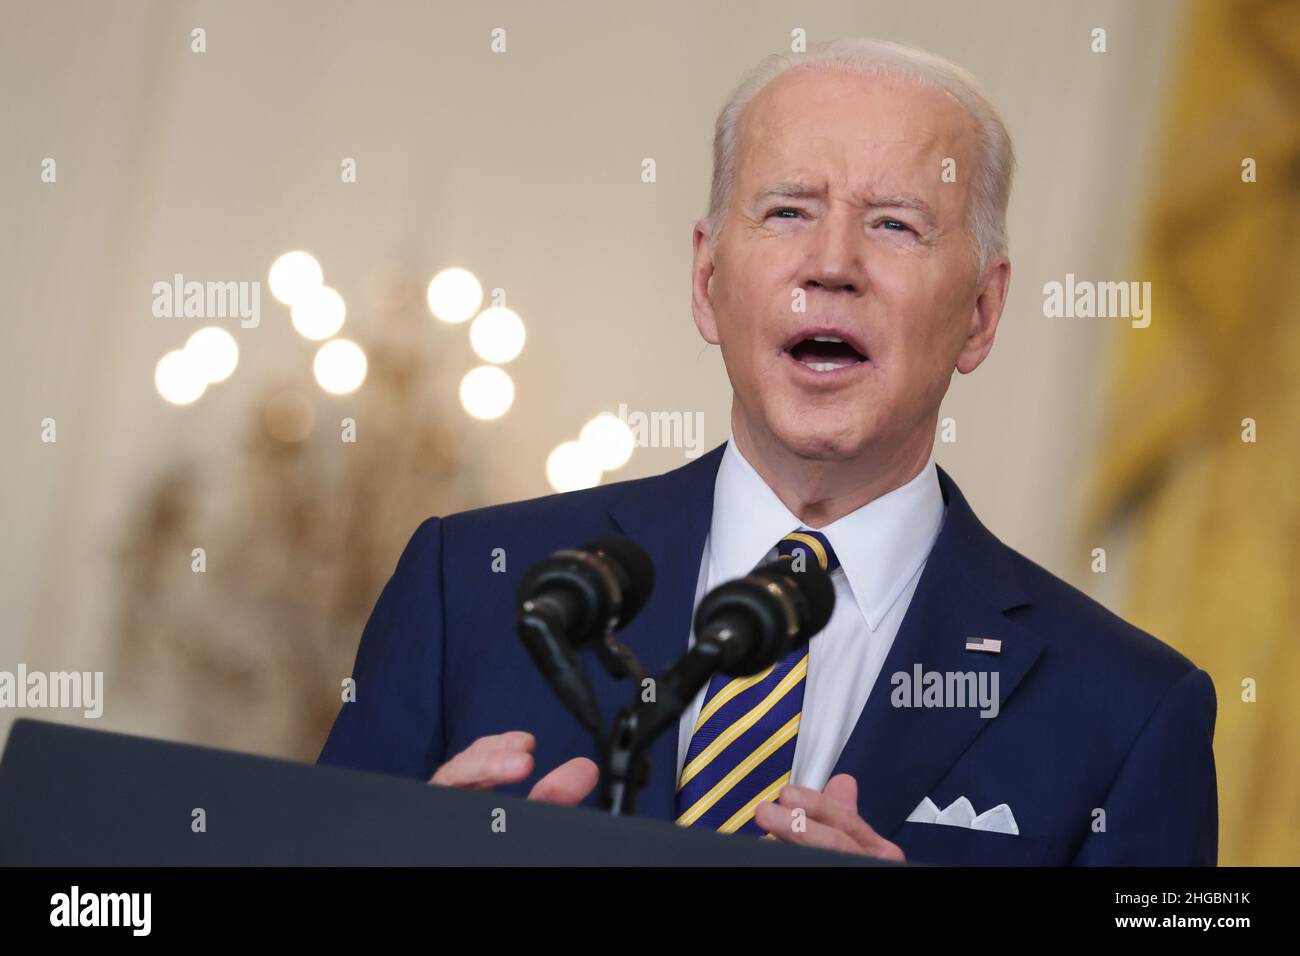 United States President Joe Biden holds a press conference in the East Room of the White House in Washington, DC on Wednesday, January 19, 2022.Credit: Oliver Contreras/Pool via CNP /MediaPunch Stock Photo